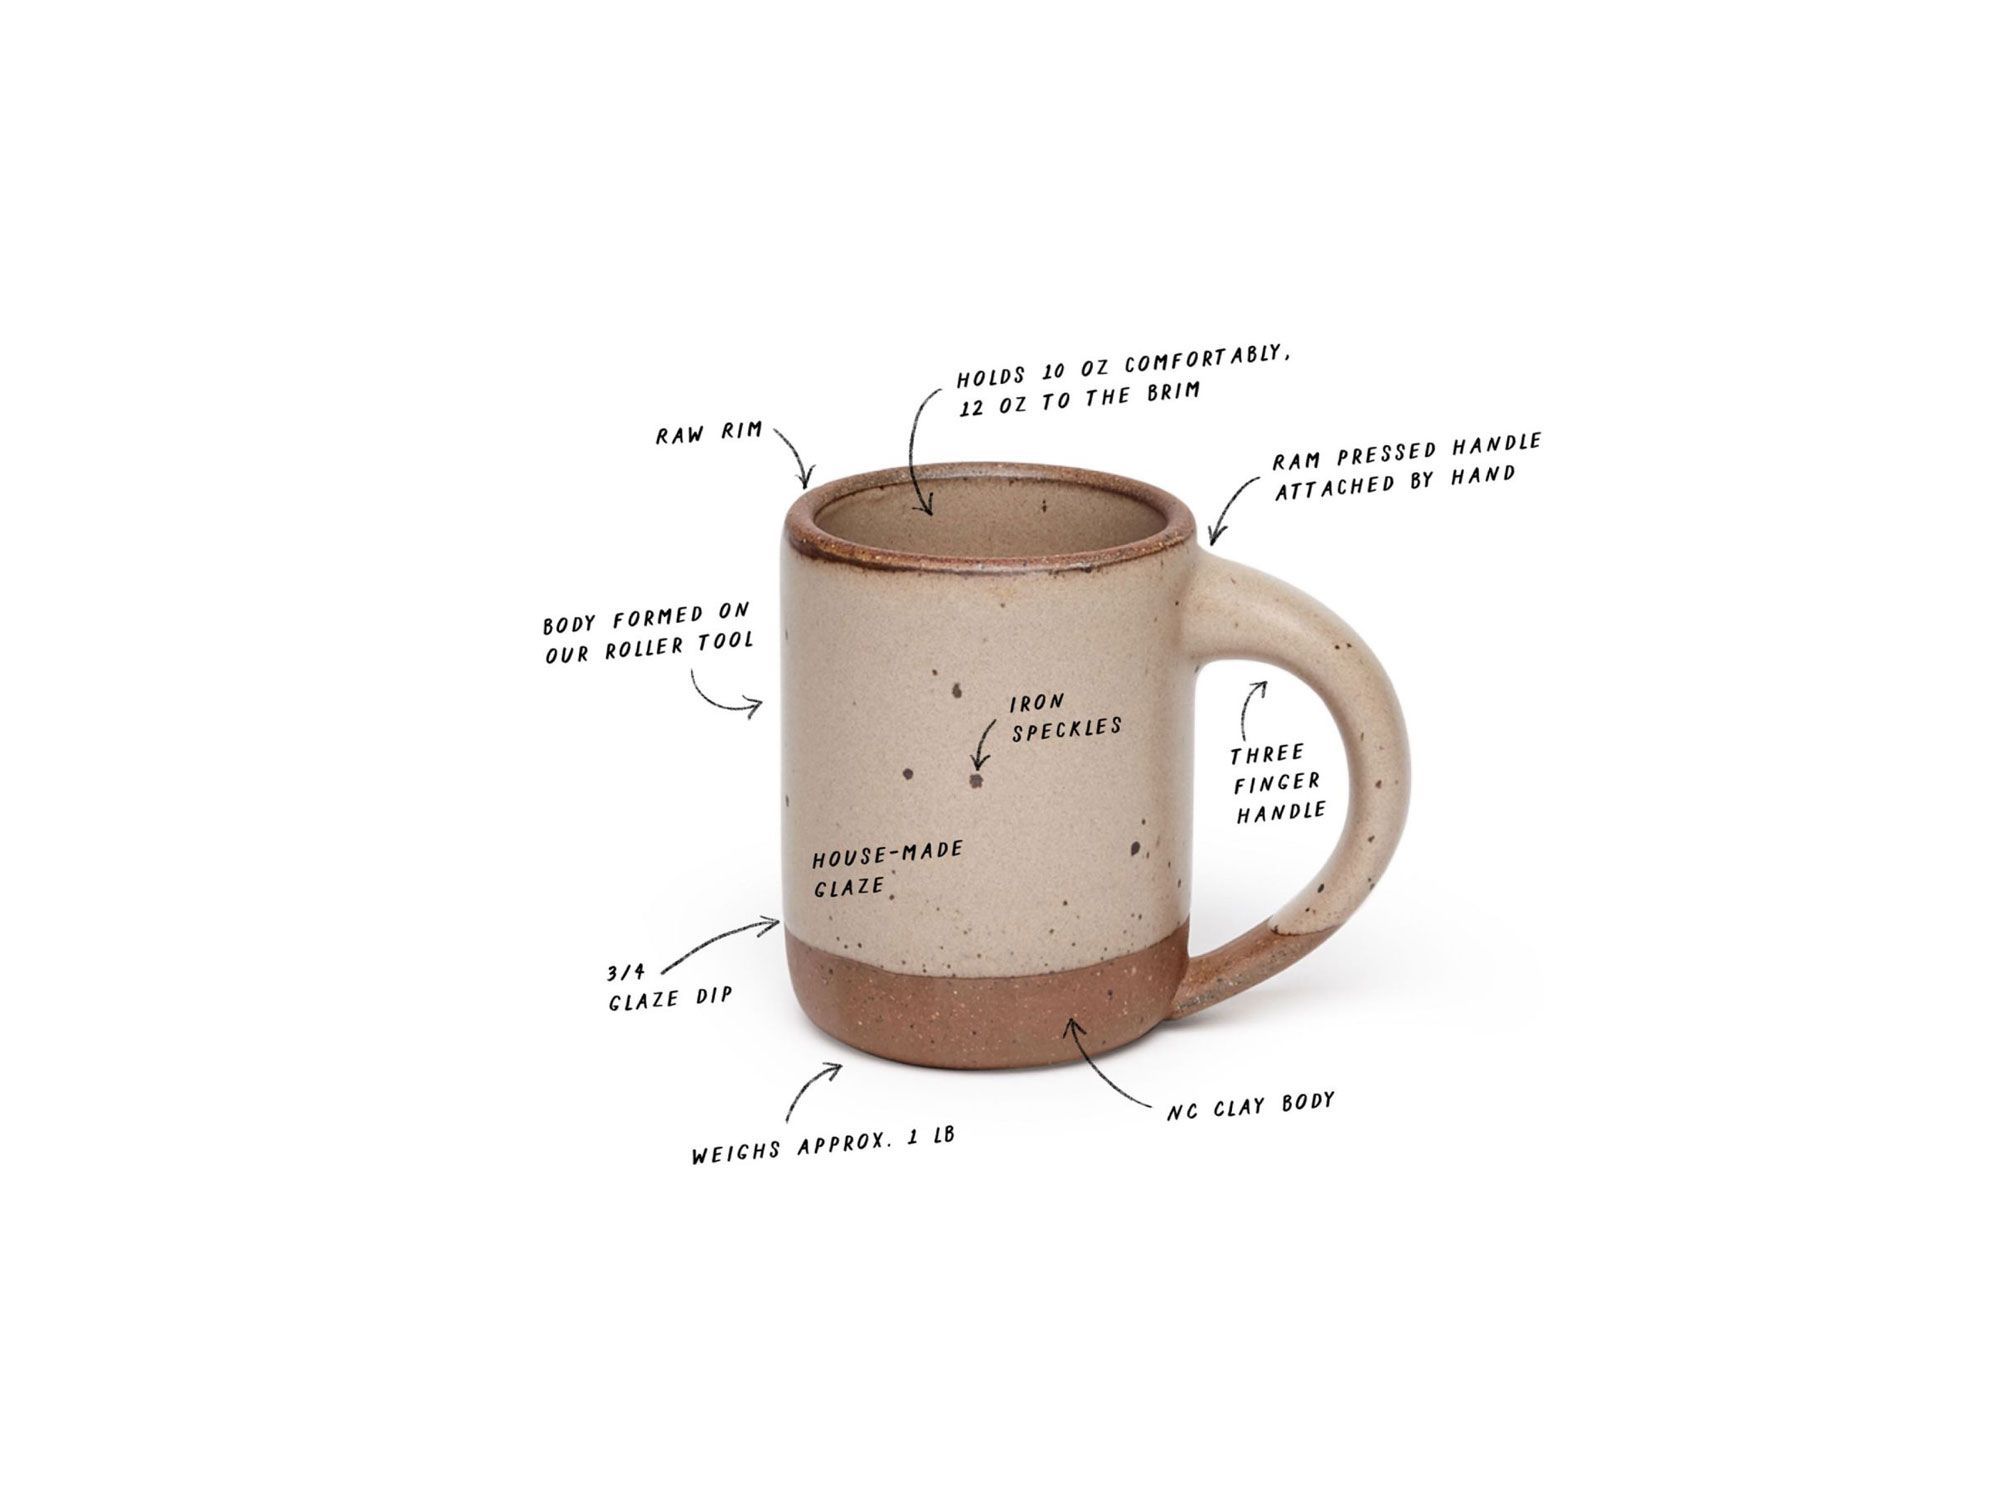 The East Fork Mug in Morel, a taupe color, with several annotations and arrows on it pointing to distinct features like '3/4 Glaze Dip' and 'Body Formed On Our Roller Tool'.